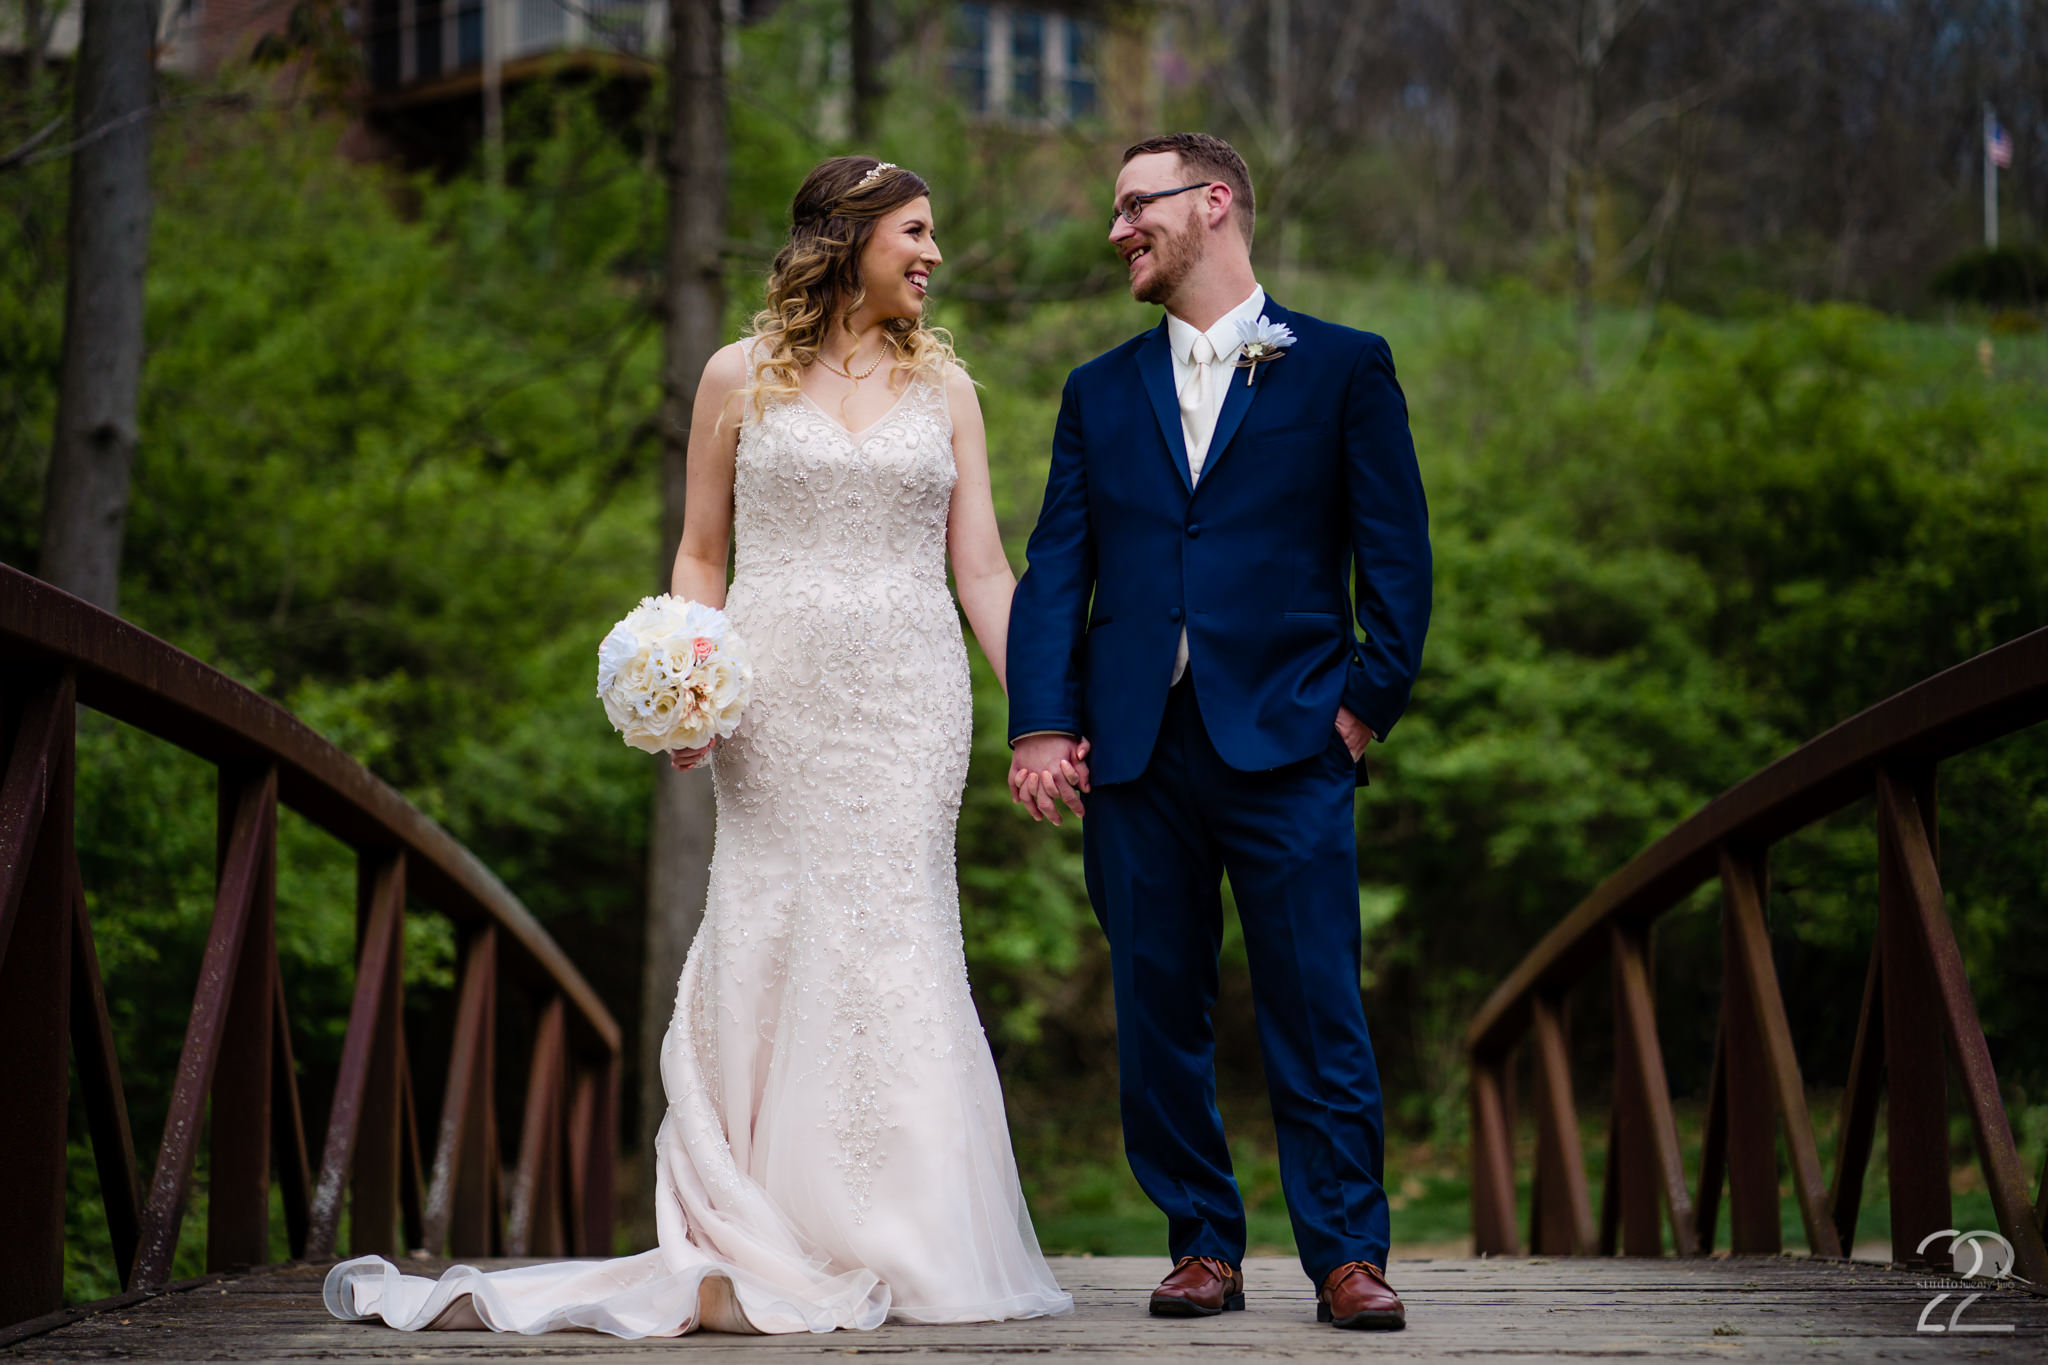  Nick and Erica chose to get married at Aston Oaks Golf Club in Cincinnati, Ohio on a warm spring day. Doing their first look on a beautiful bridge alongside one of Aston Oaks